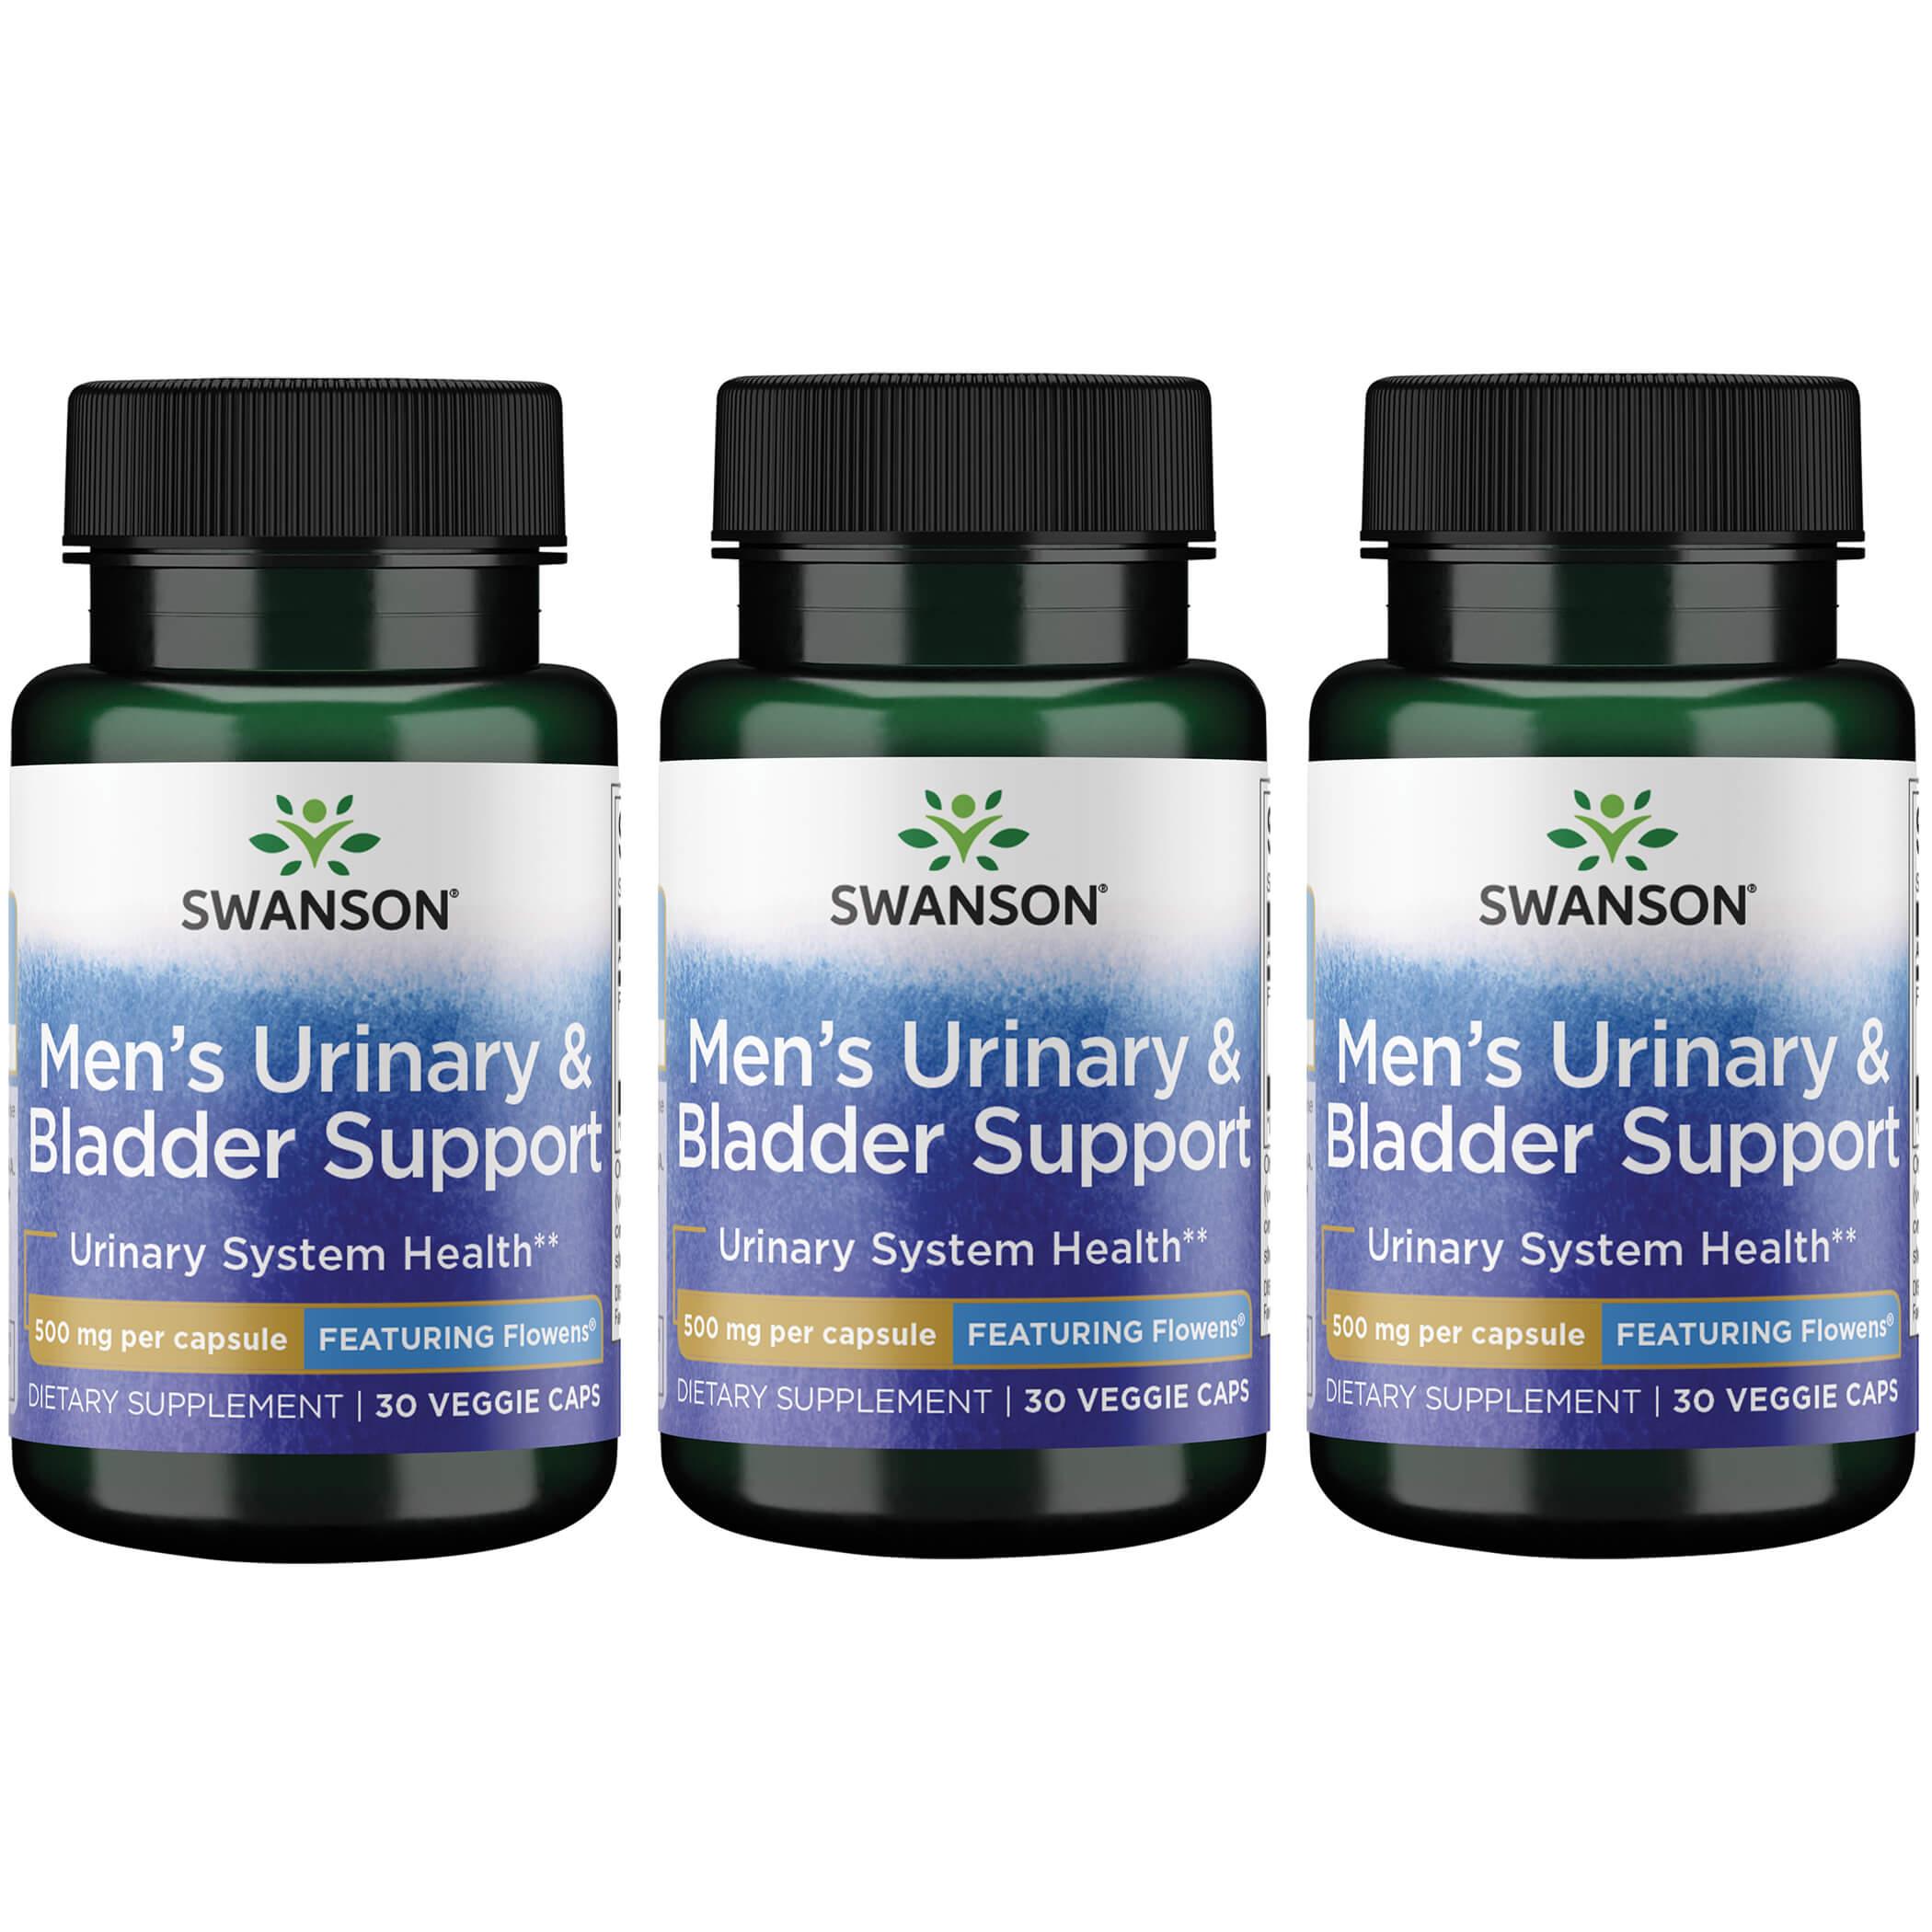 Swanson Premium Mens Urinary and Bladder Support - Featuring Flowens 3 Pack Vitamin 500 mg 30 Veg Caps Prostate Health